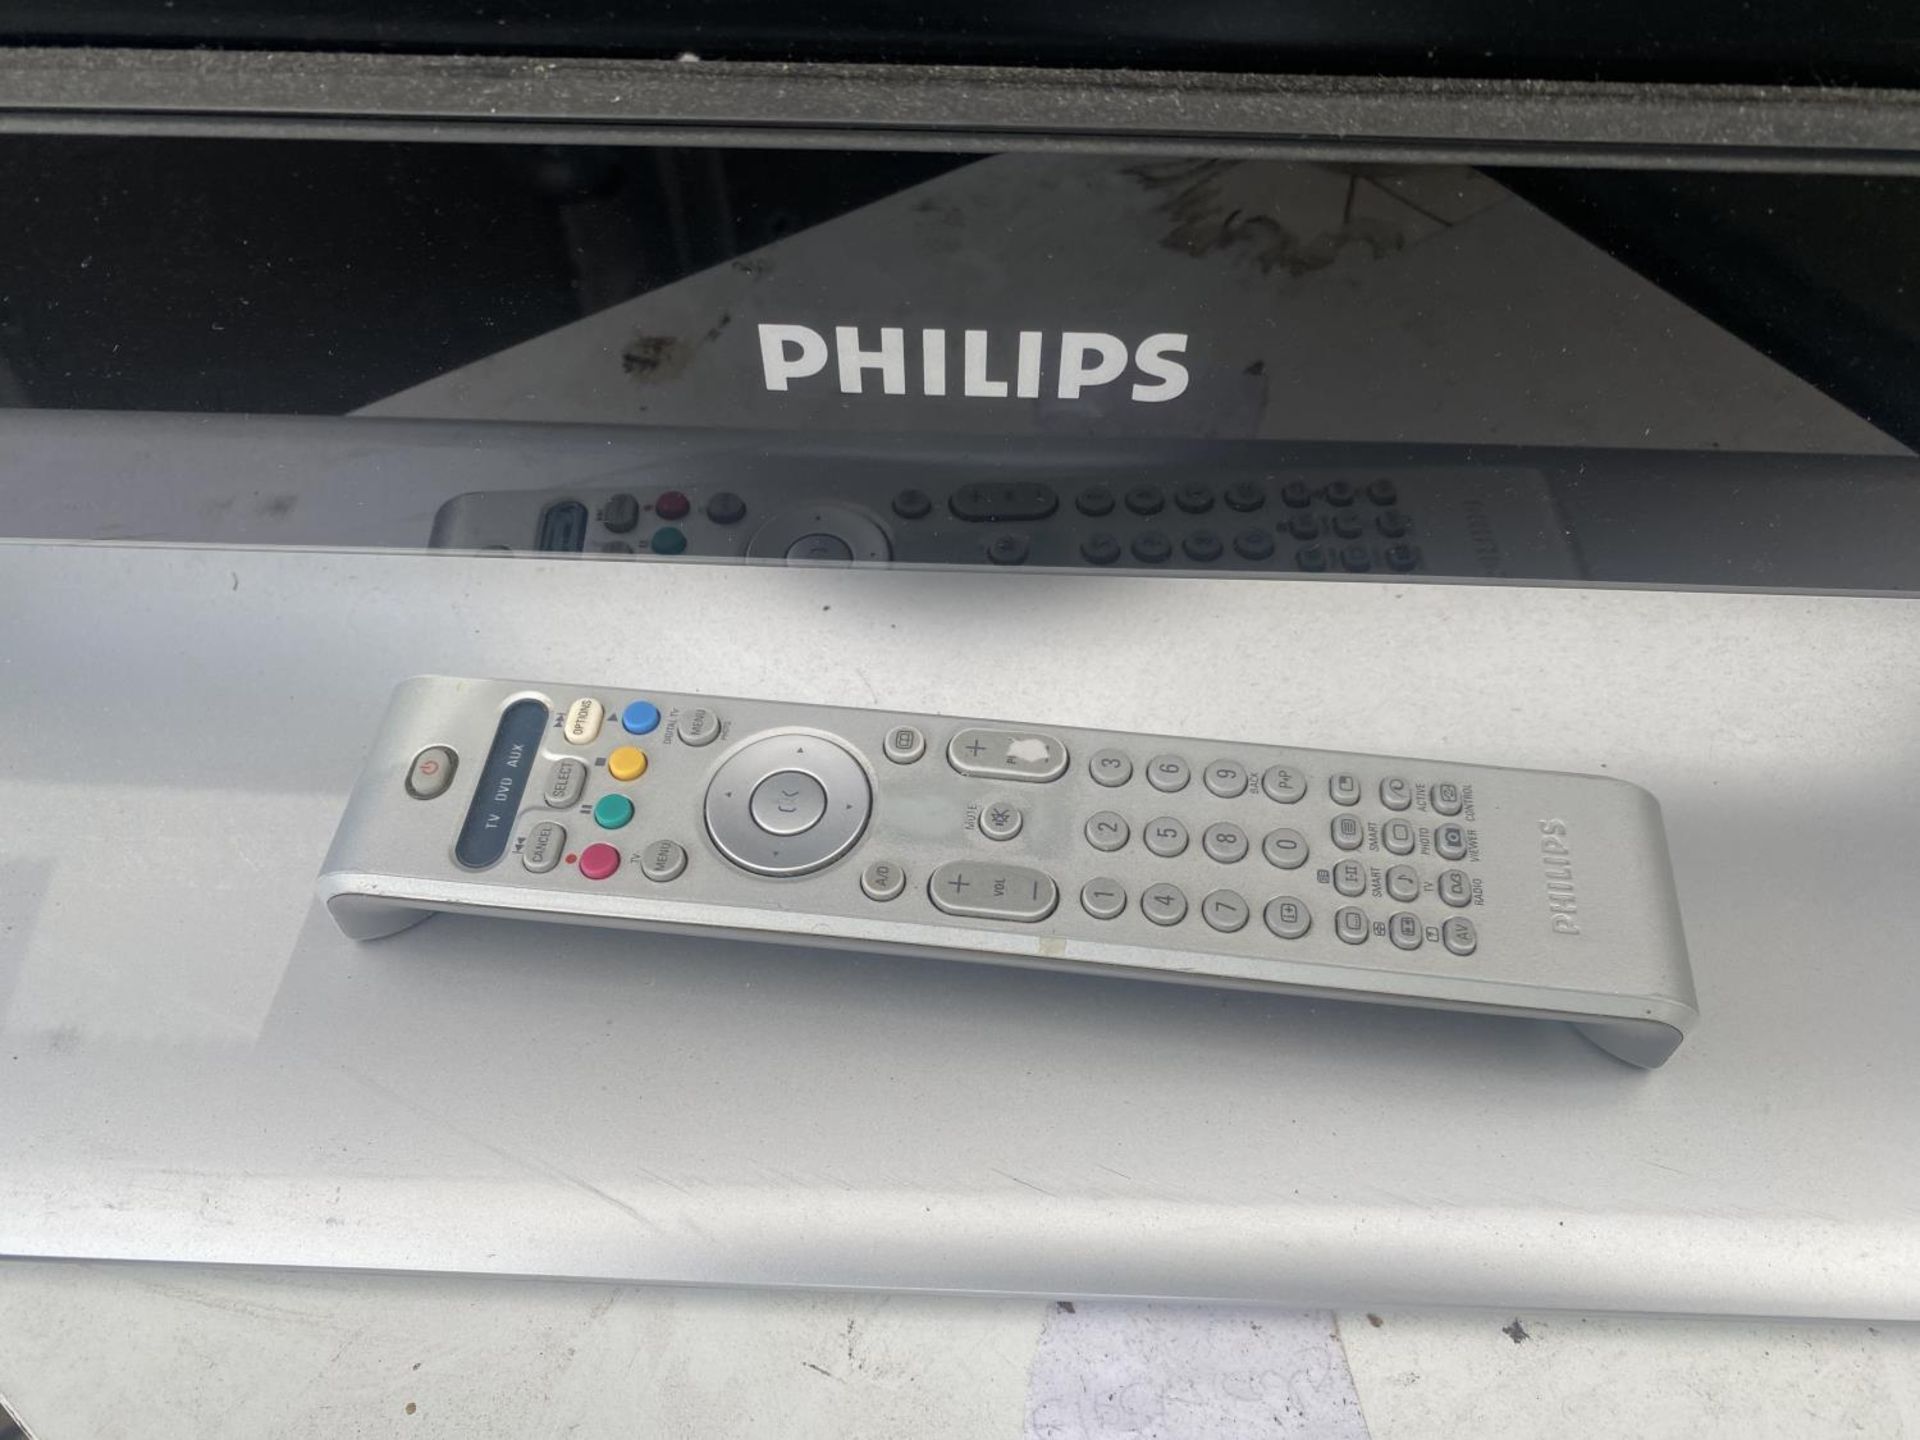 A 37" PHILIPS TELEVISION WUTH REMOTE CONTROL - Image 2 of 4